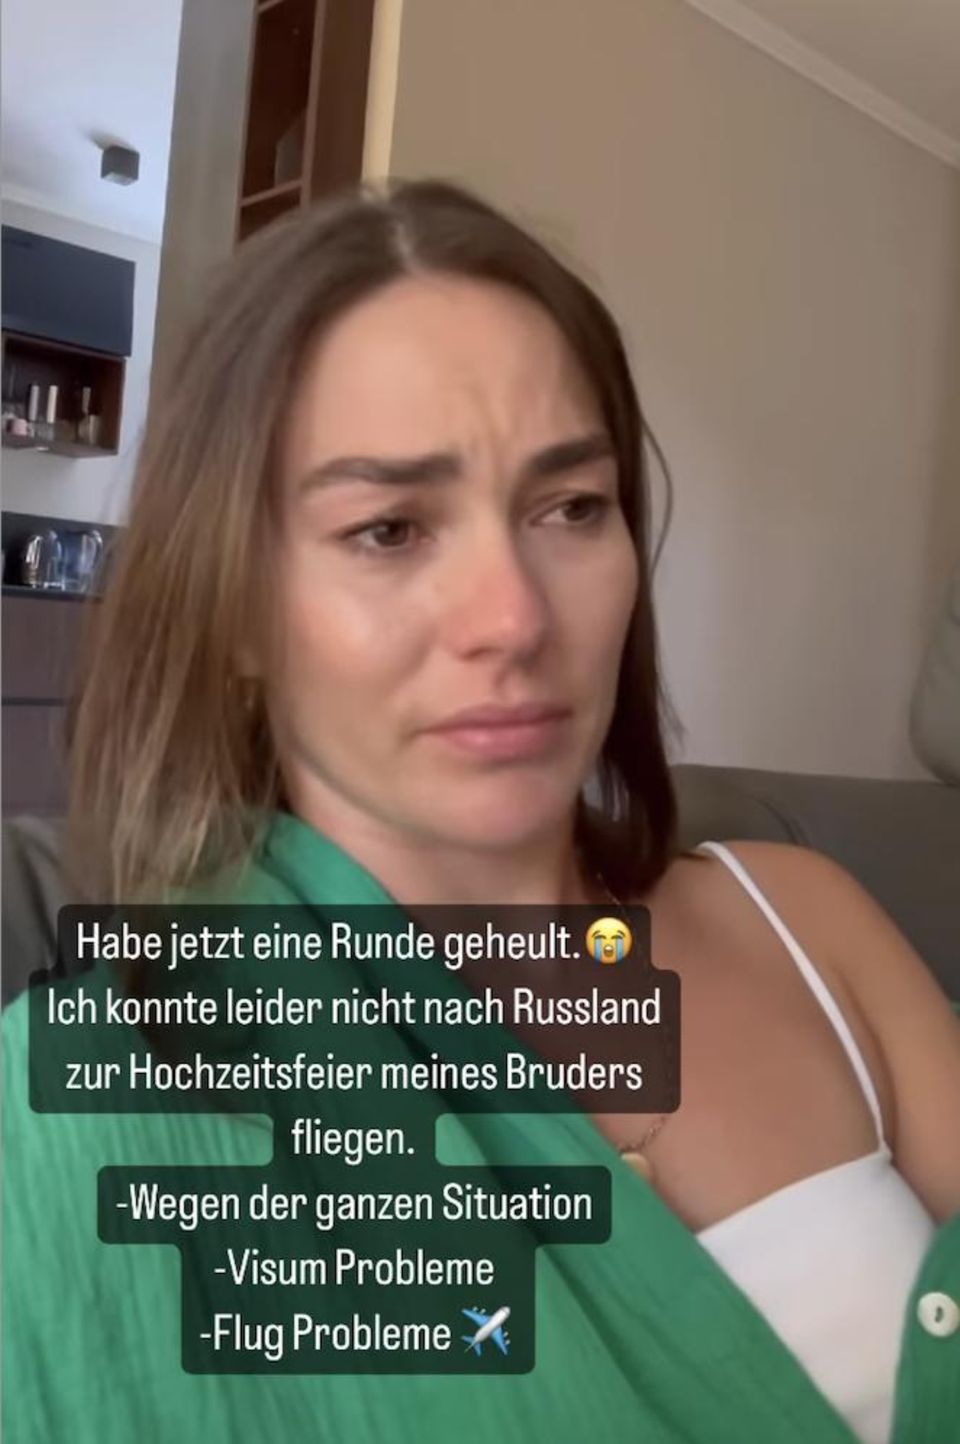 Renata Lusin is crying: she missed her brother's wedding because of visa problems